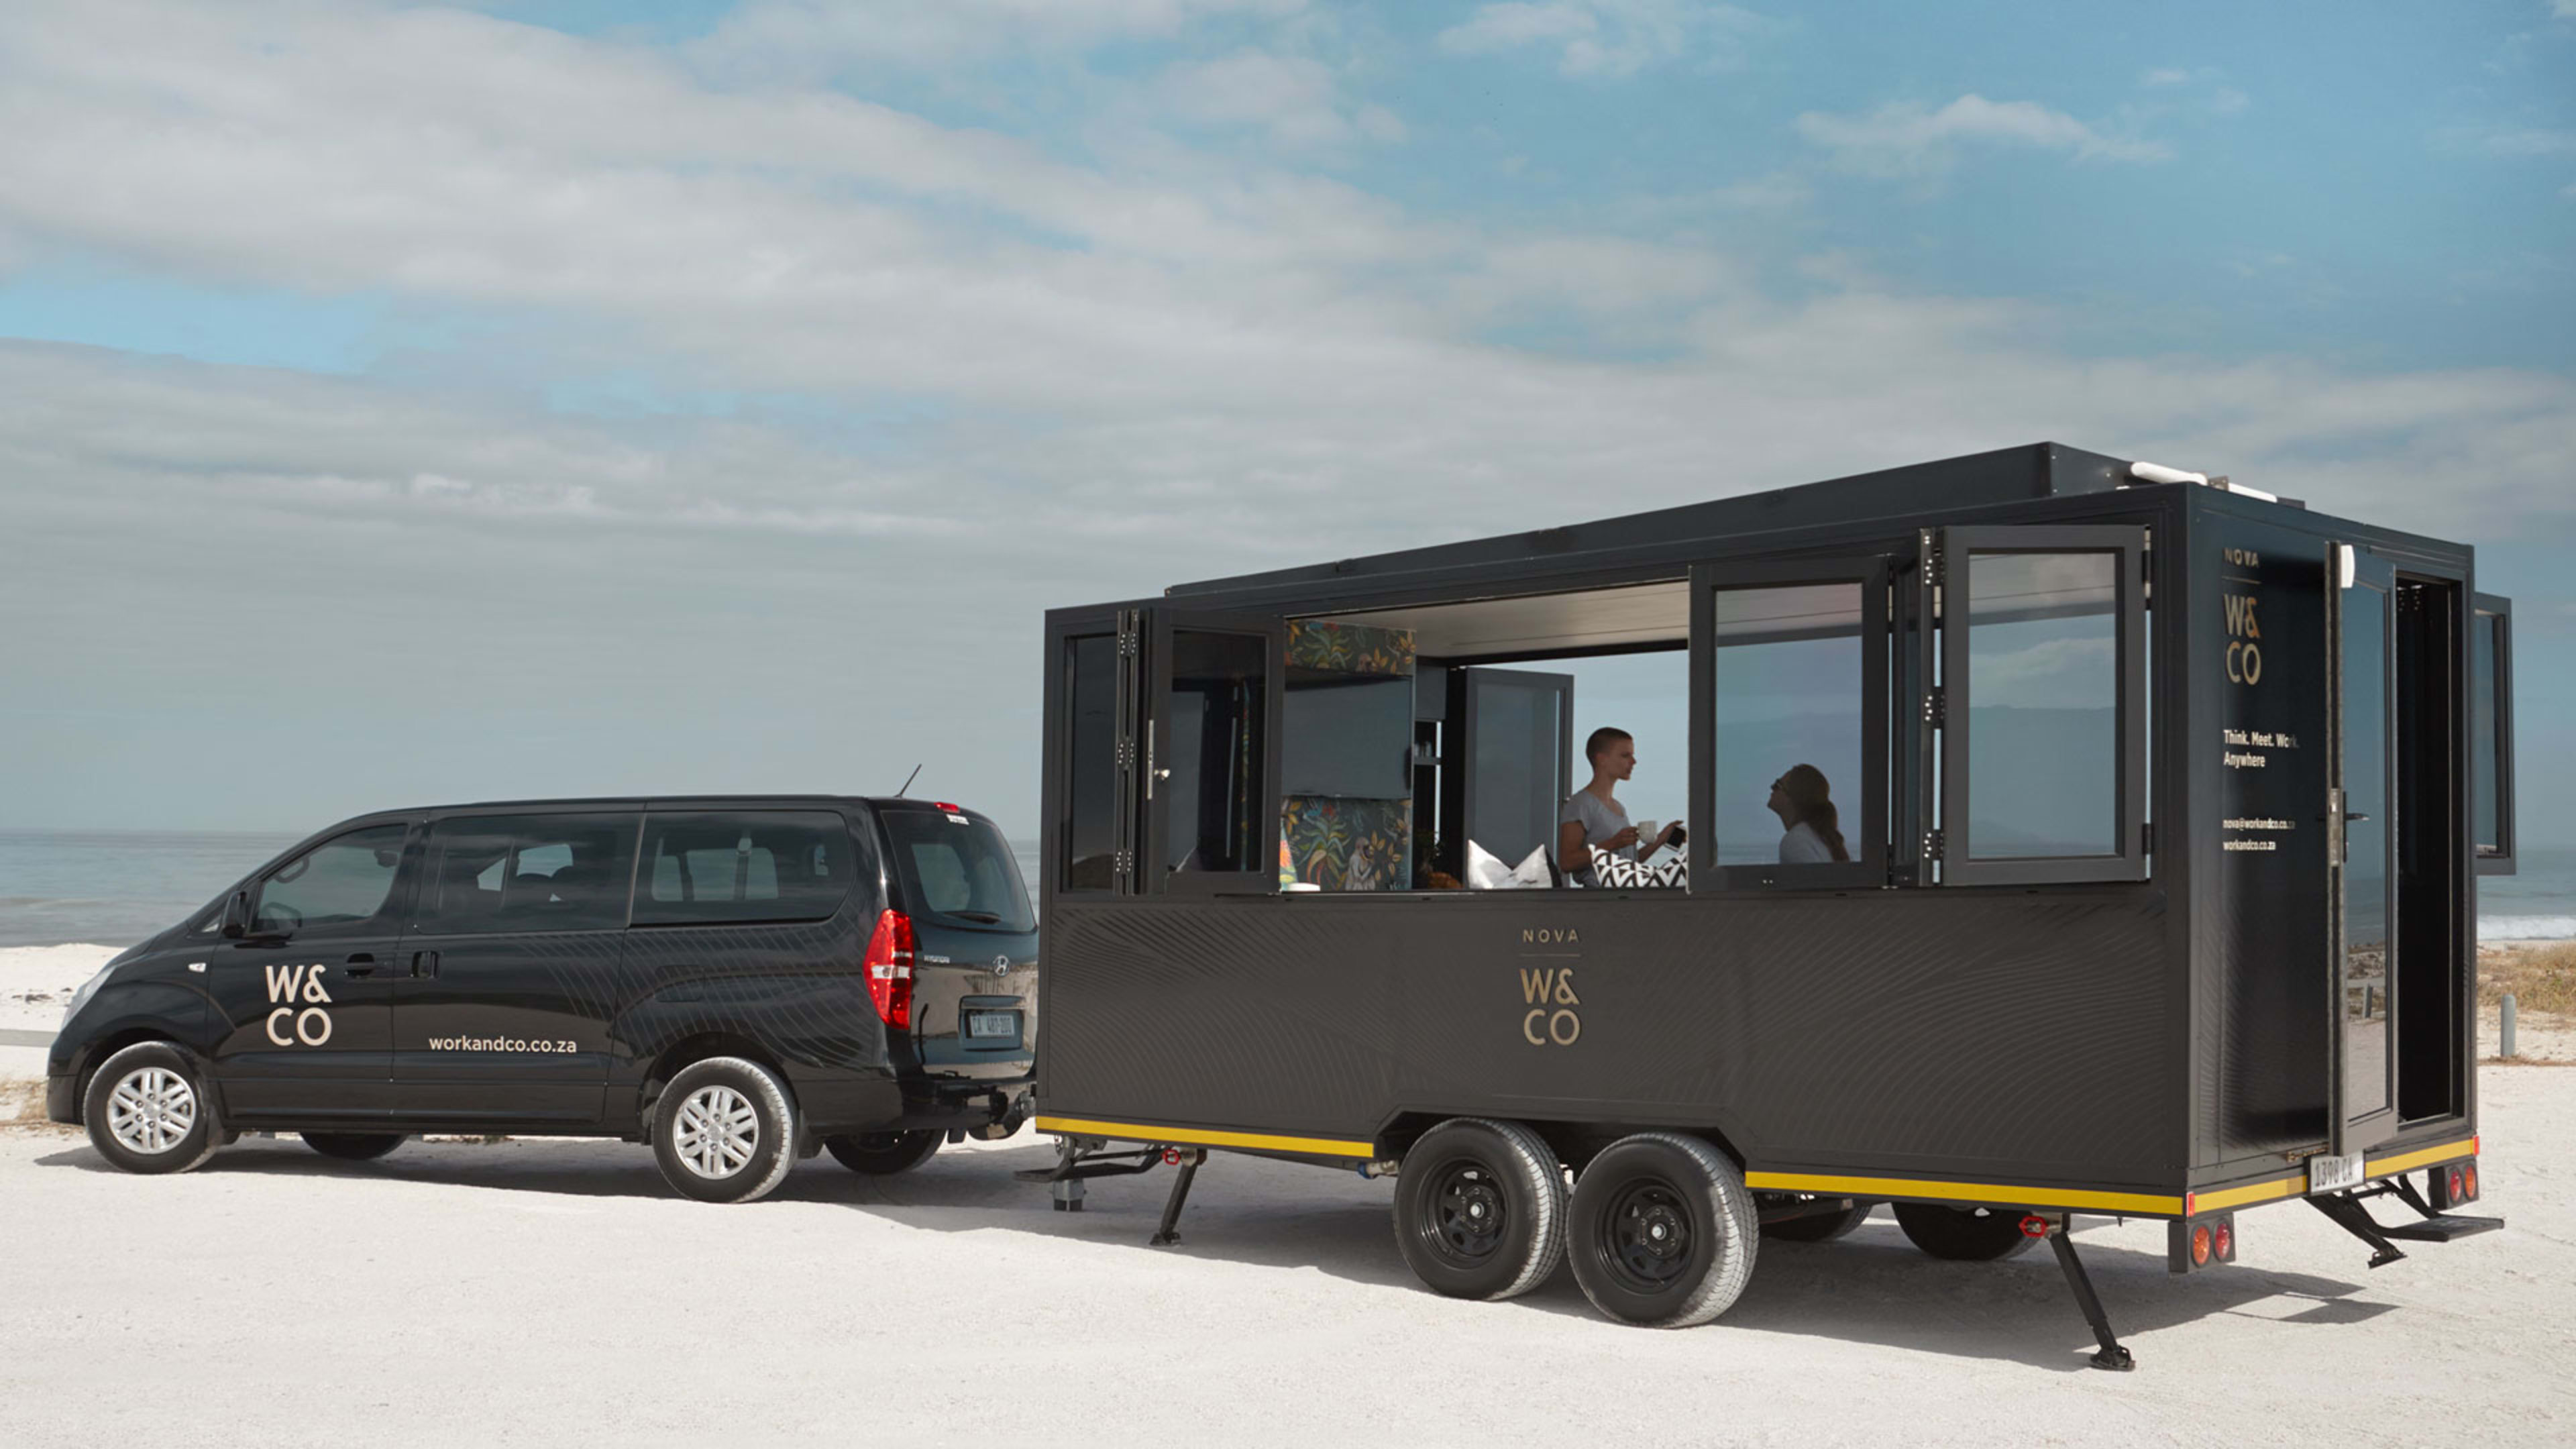 This coworking space is like a horse trailer, but for humans